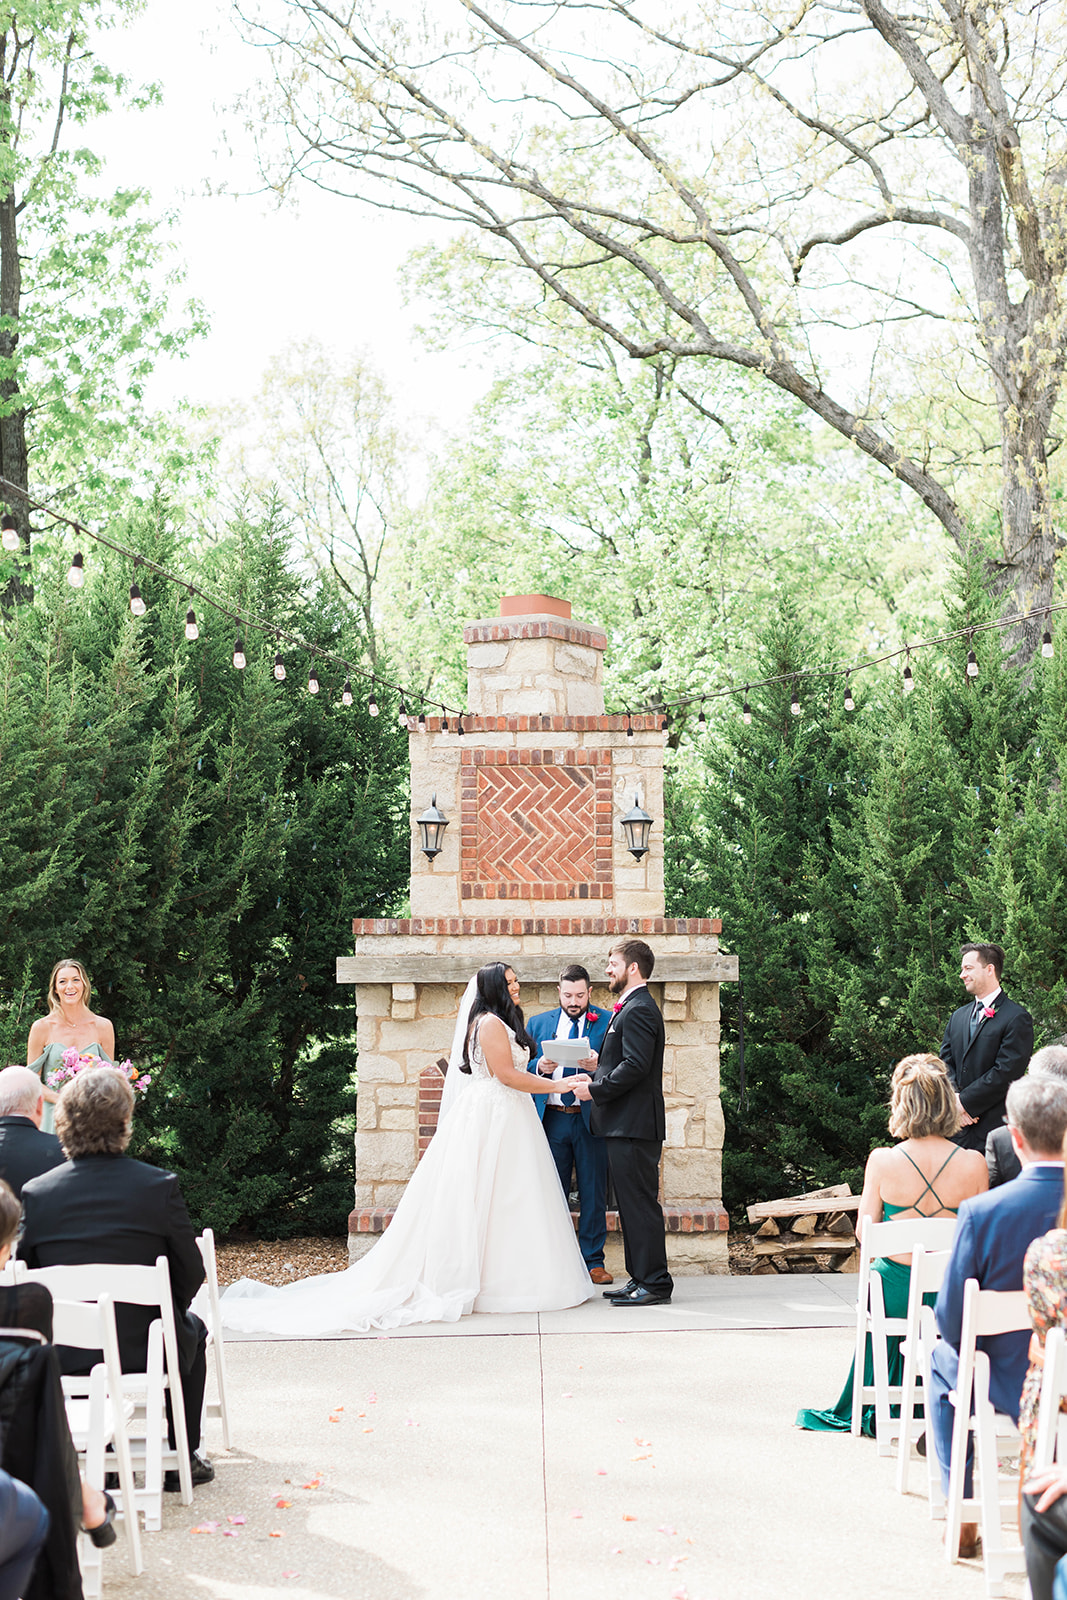 A spring wedding on the patio at Silver Oaks Chateau in front of the fireplace